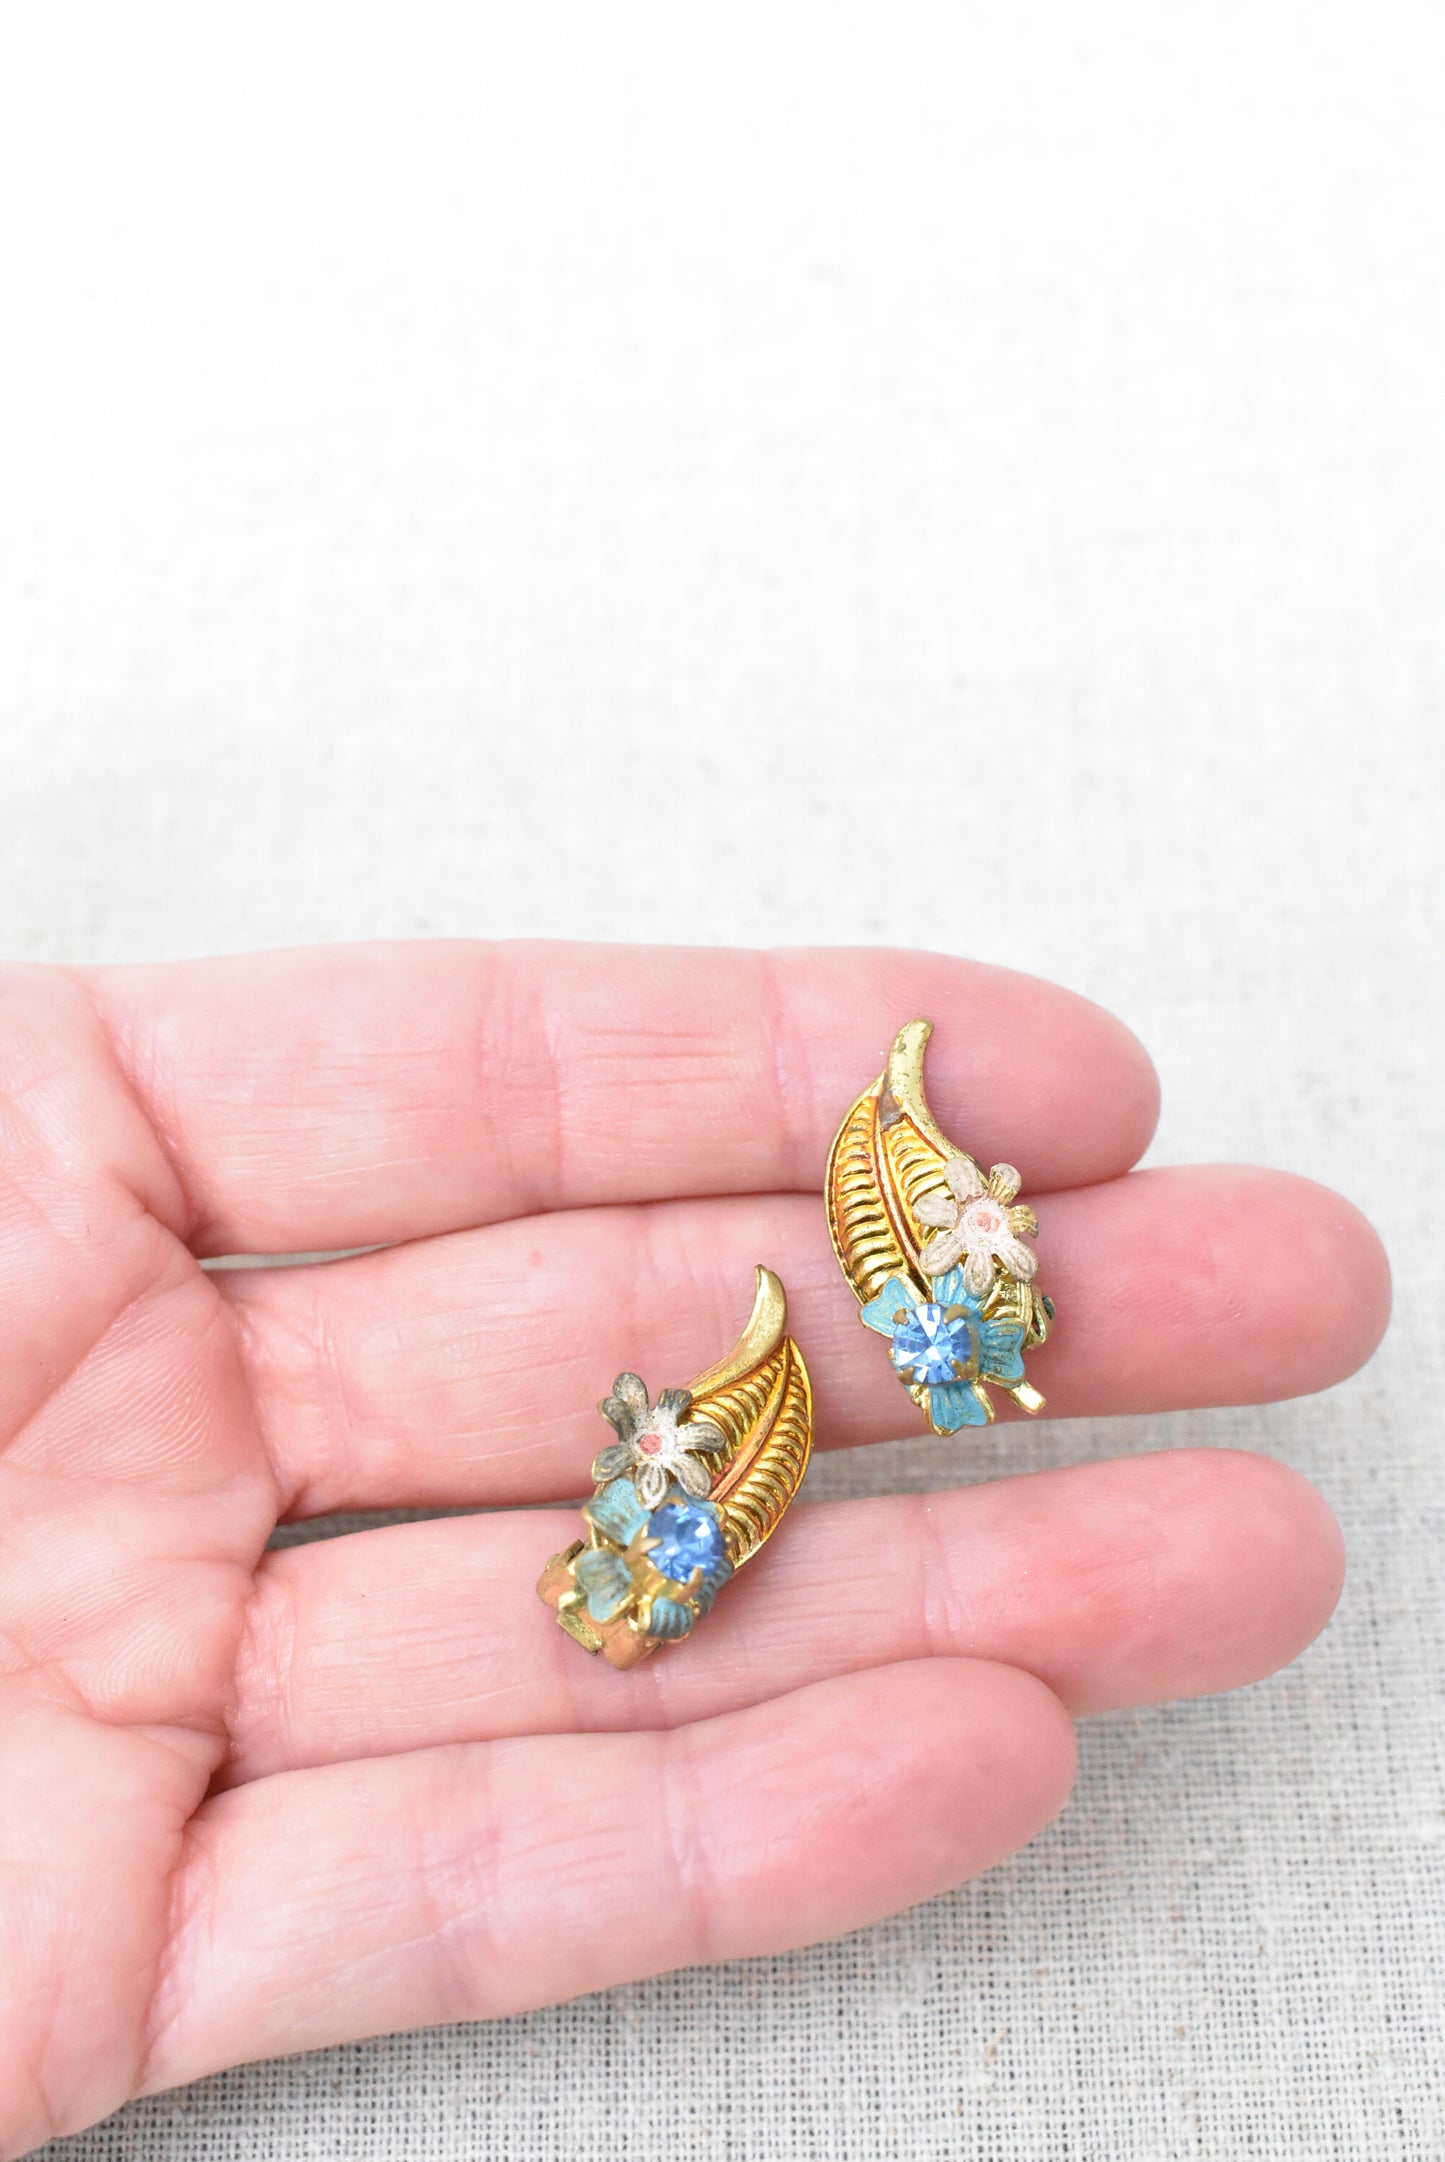 Vintage floral clip-on earrings with blue diamante